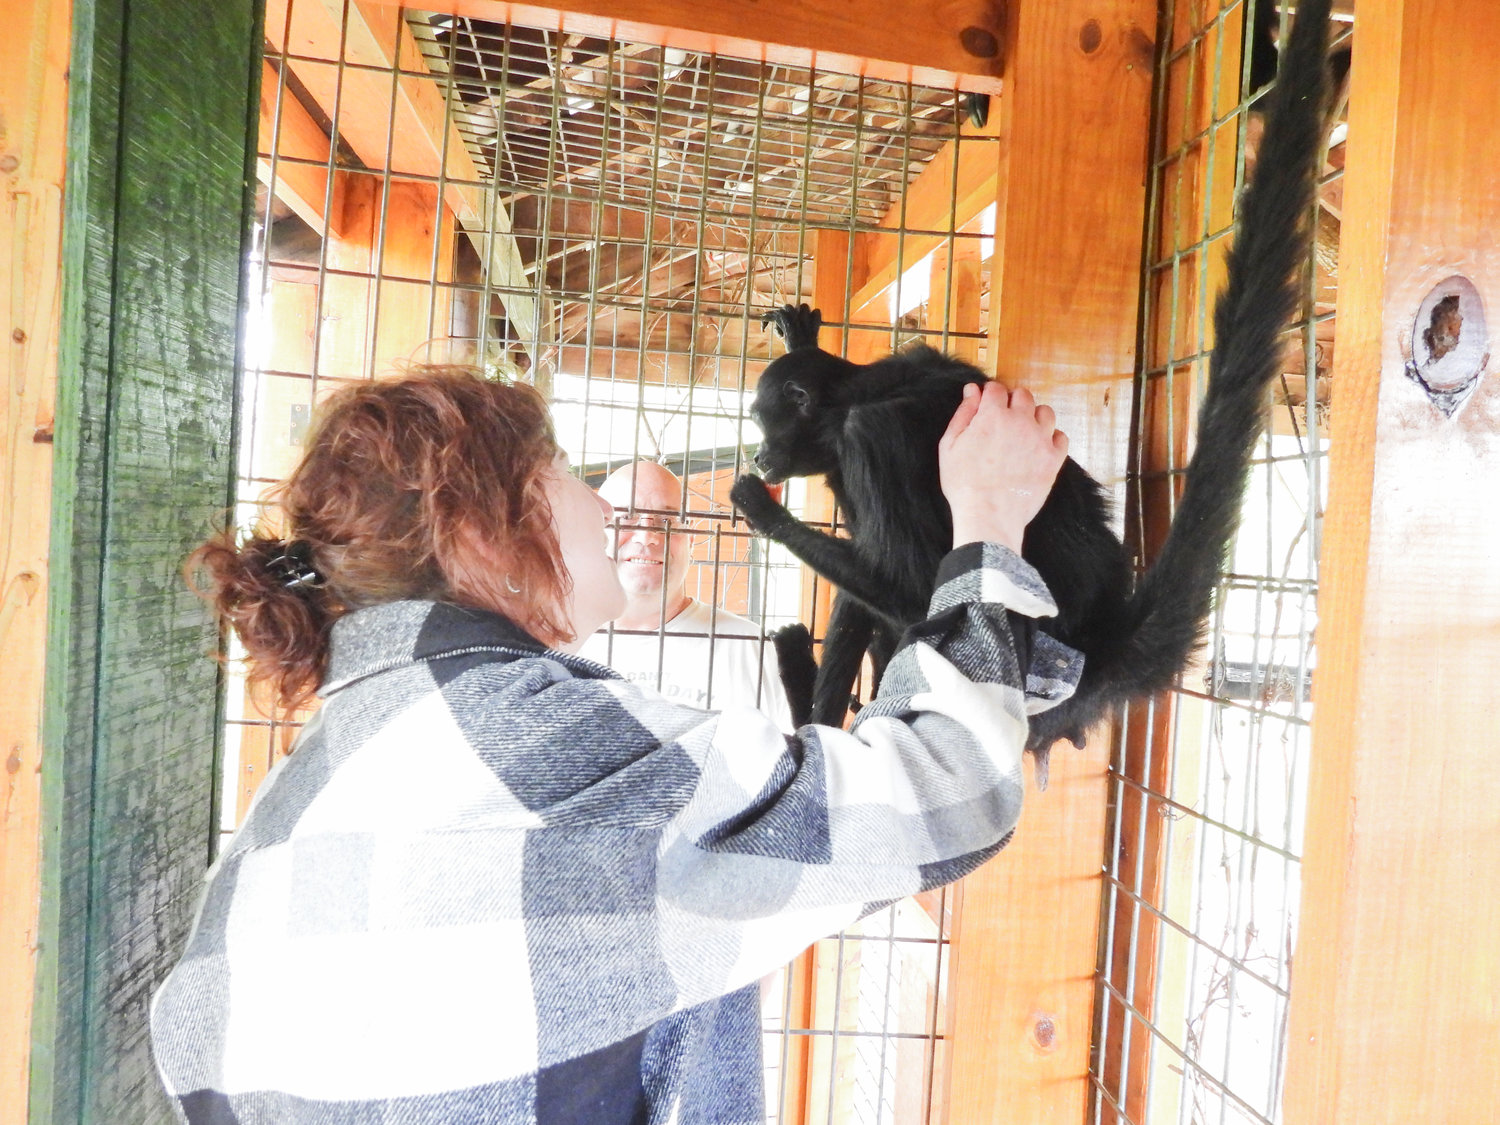 Eclectic Chic owner Valerie Pollack spends time with Gummy, the 60-year-old spider monkey at Fort Rickey Discovery Zoo